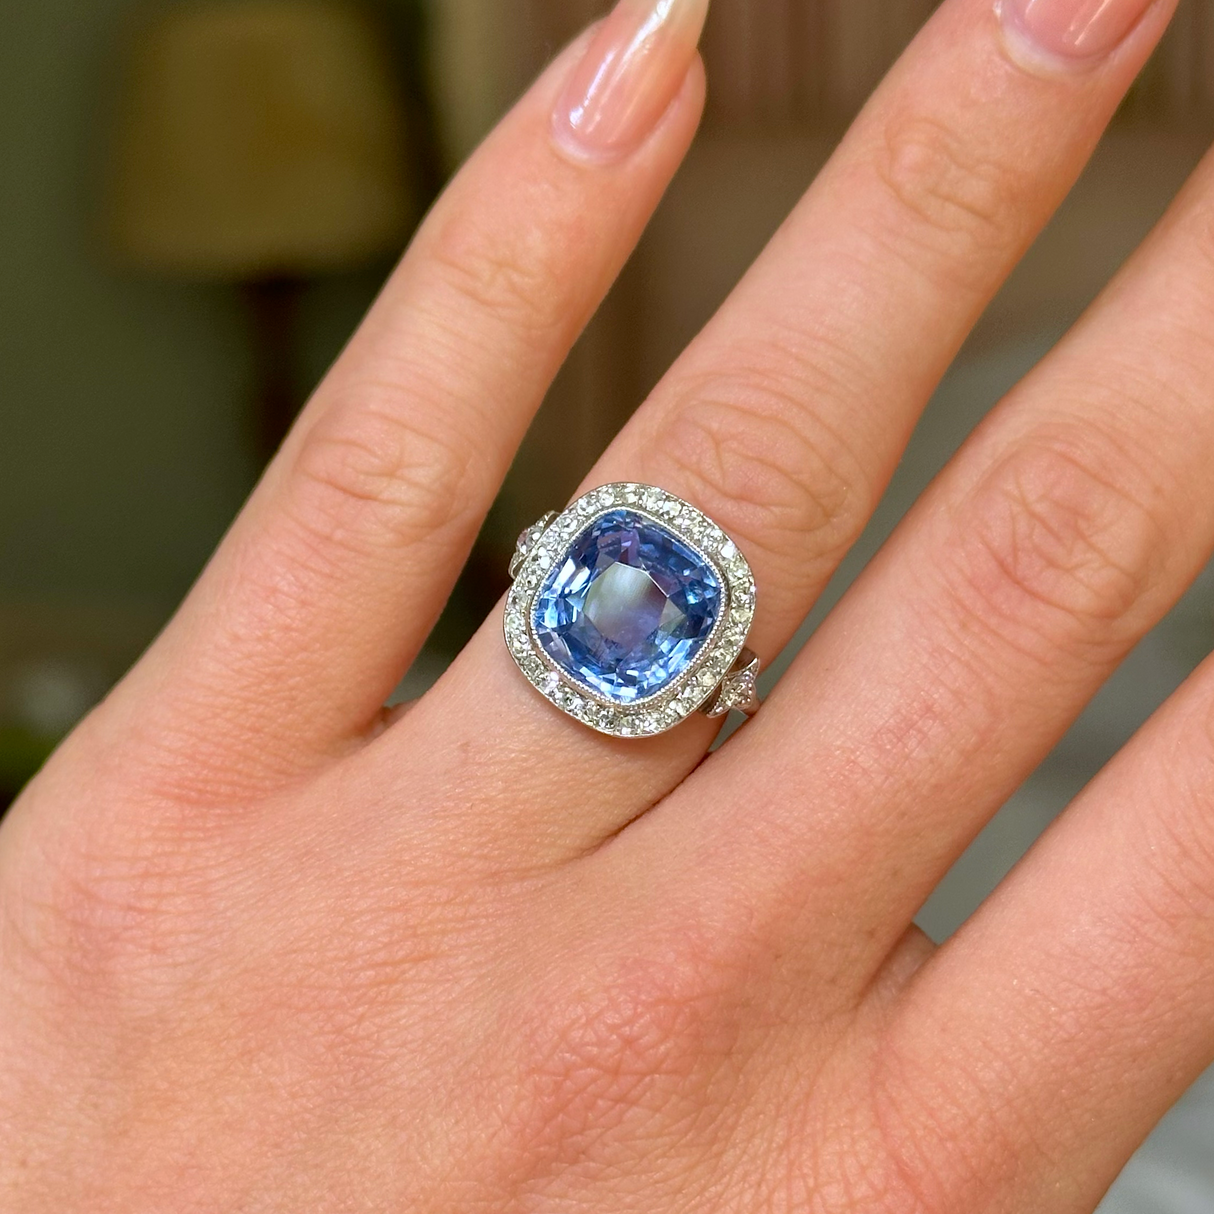 Antique, Belle Époque Sapphire and Diamond Cluster Ring, 18ct White Gold worn on hand. \